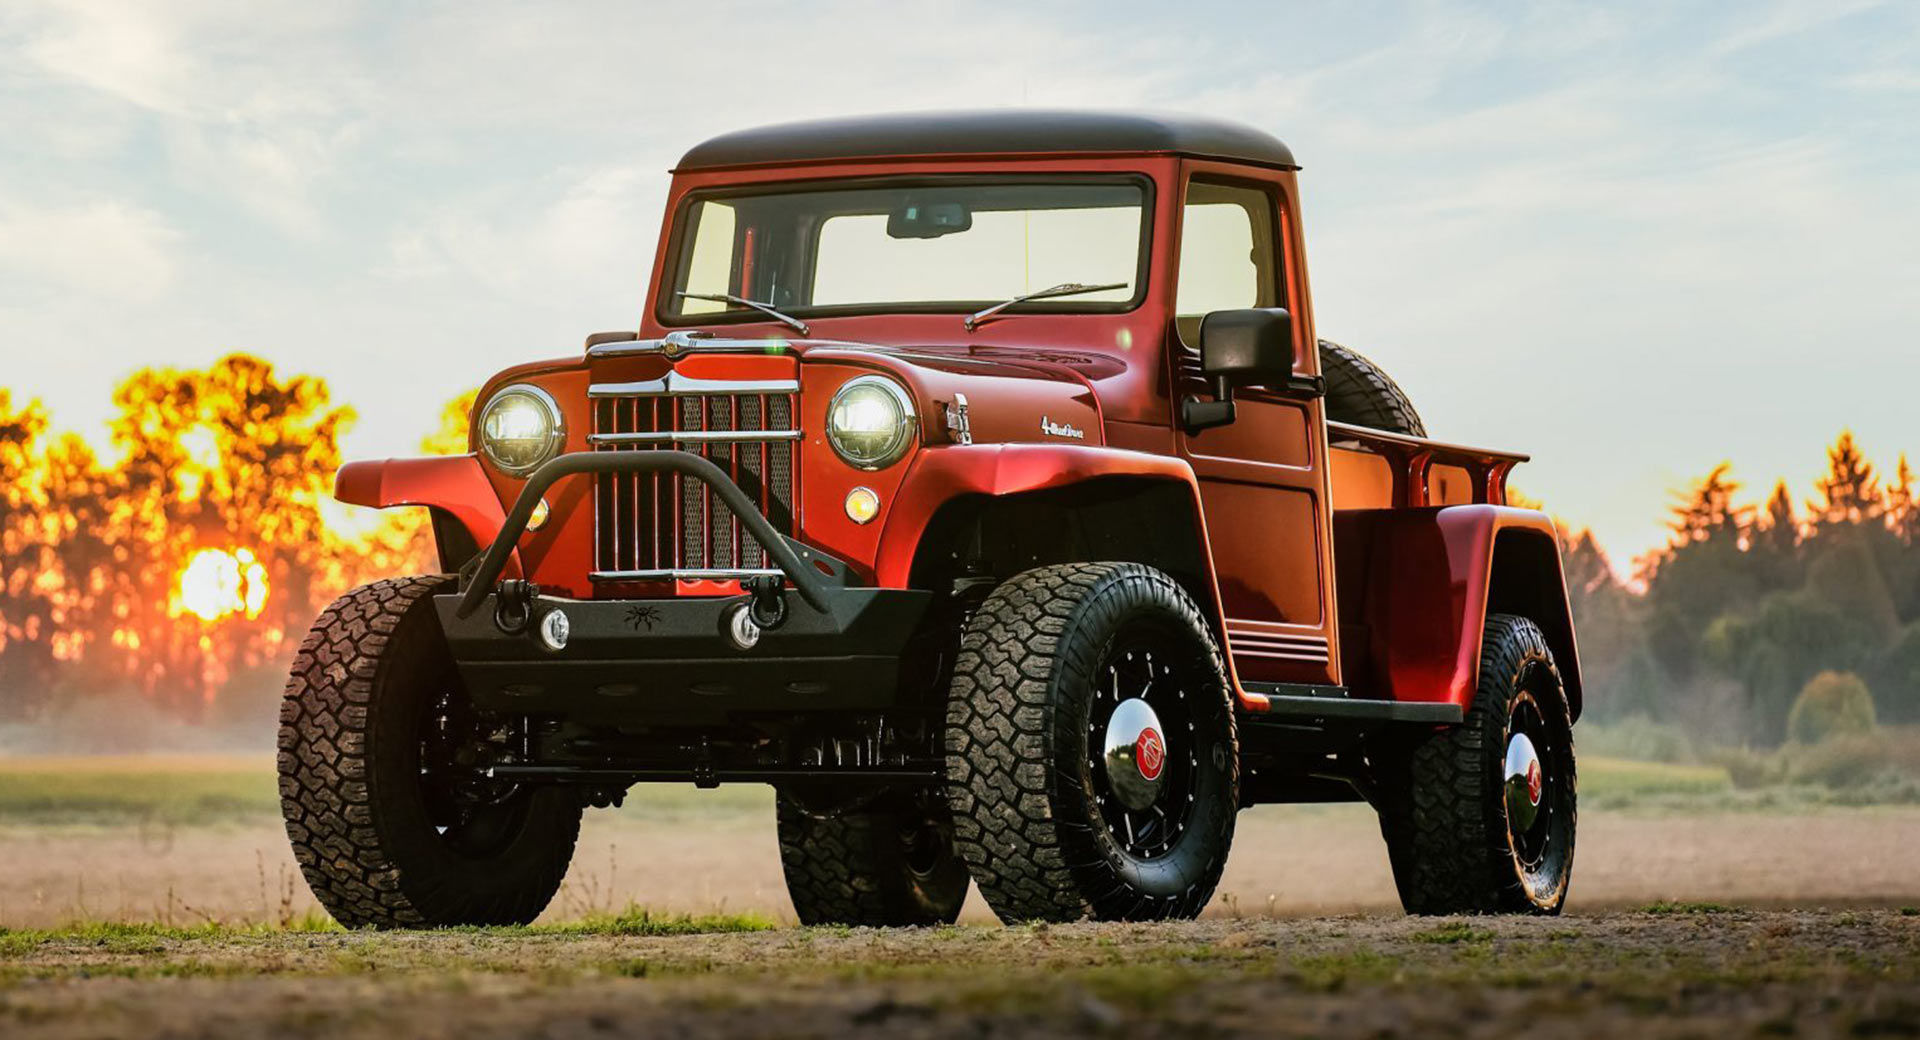 This 1955 Willys Pickup Has The Chassis And Drivetrain Of A 2014 Wrangler |  Carscoops